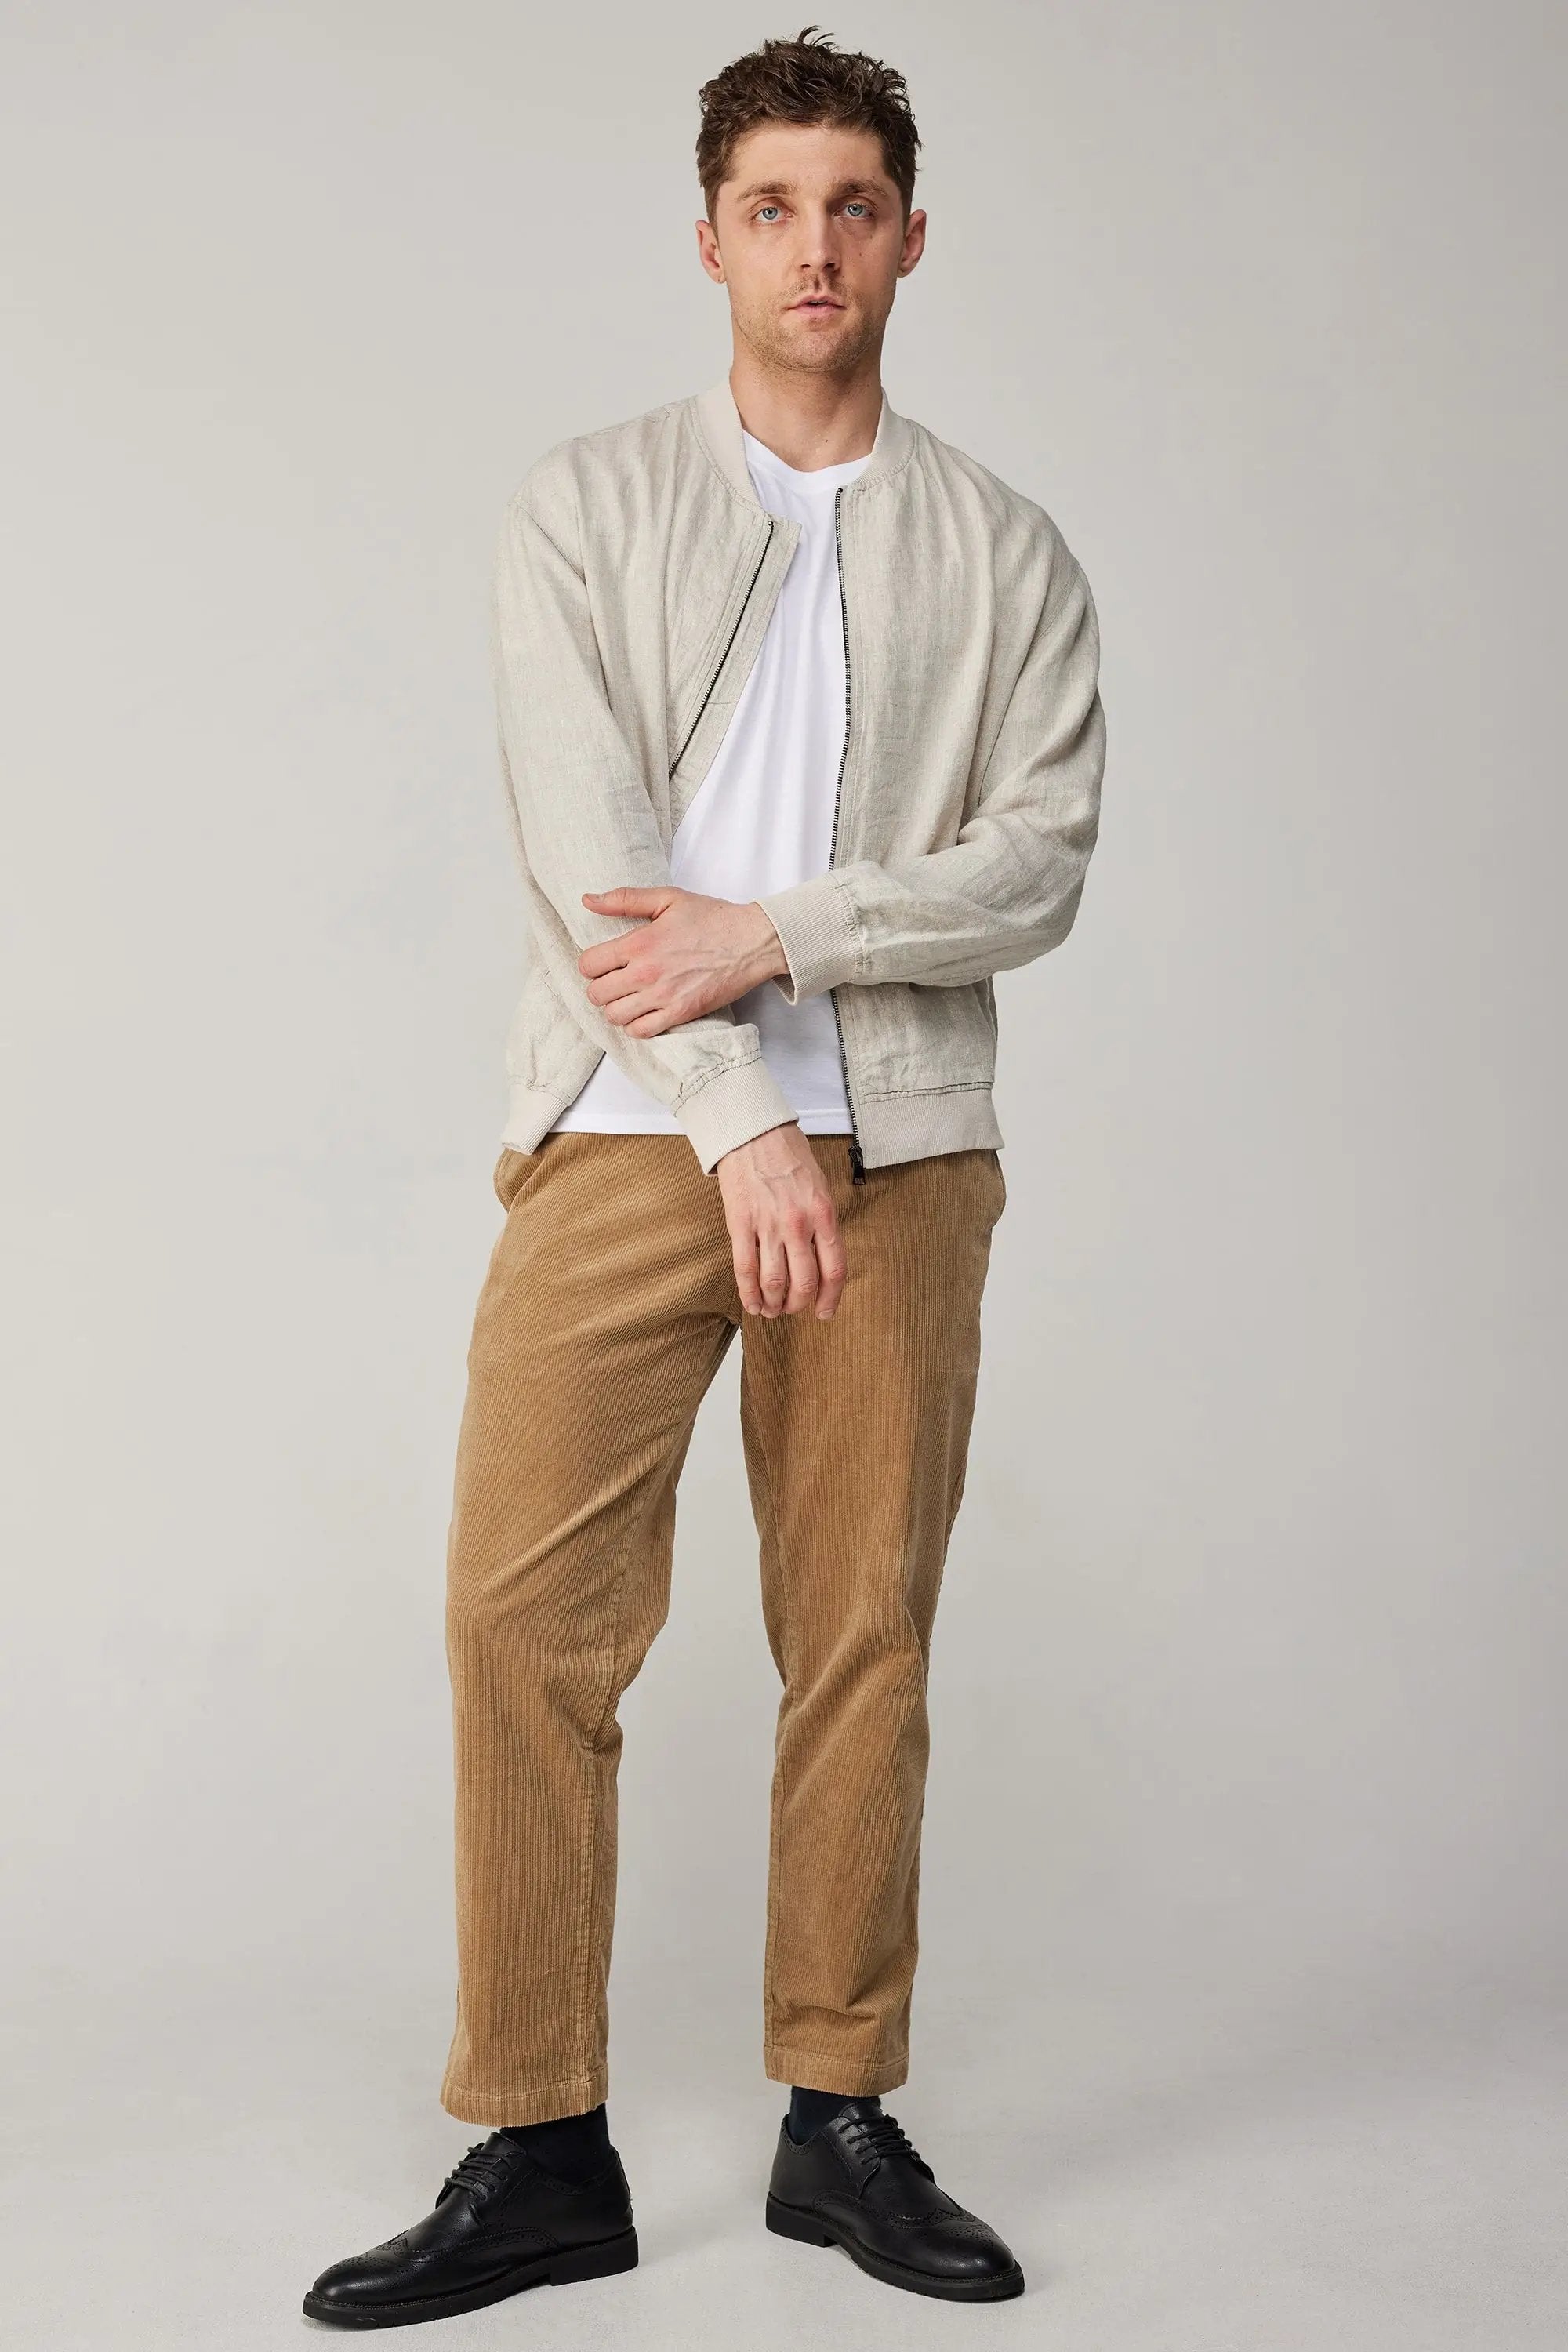 a man in a white shirt and brown pants